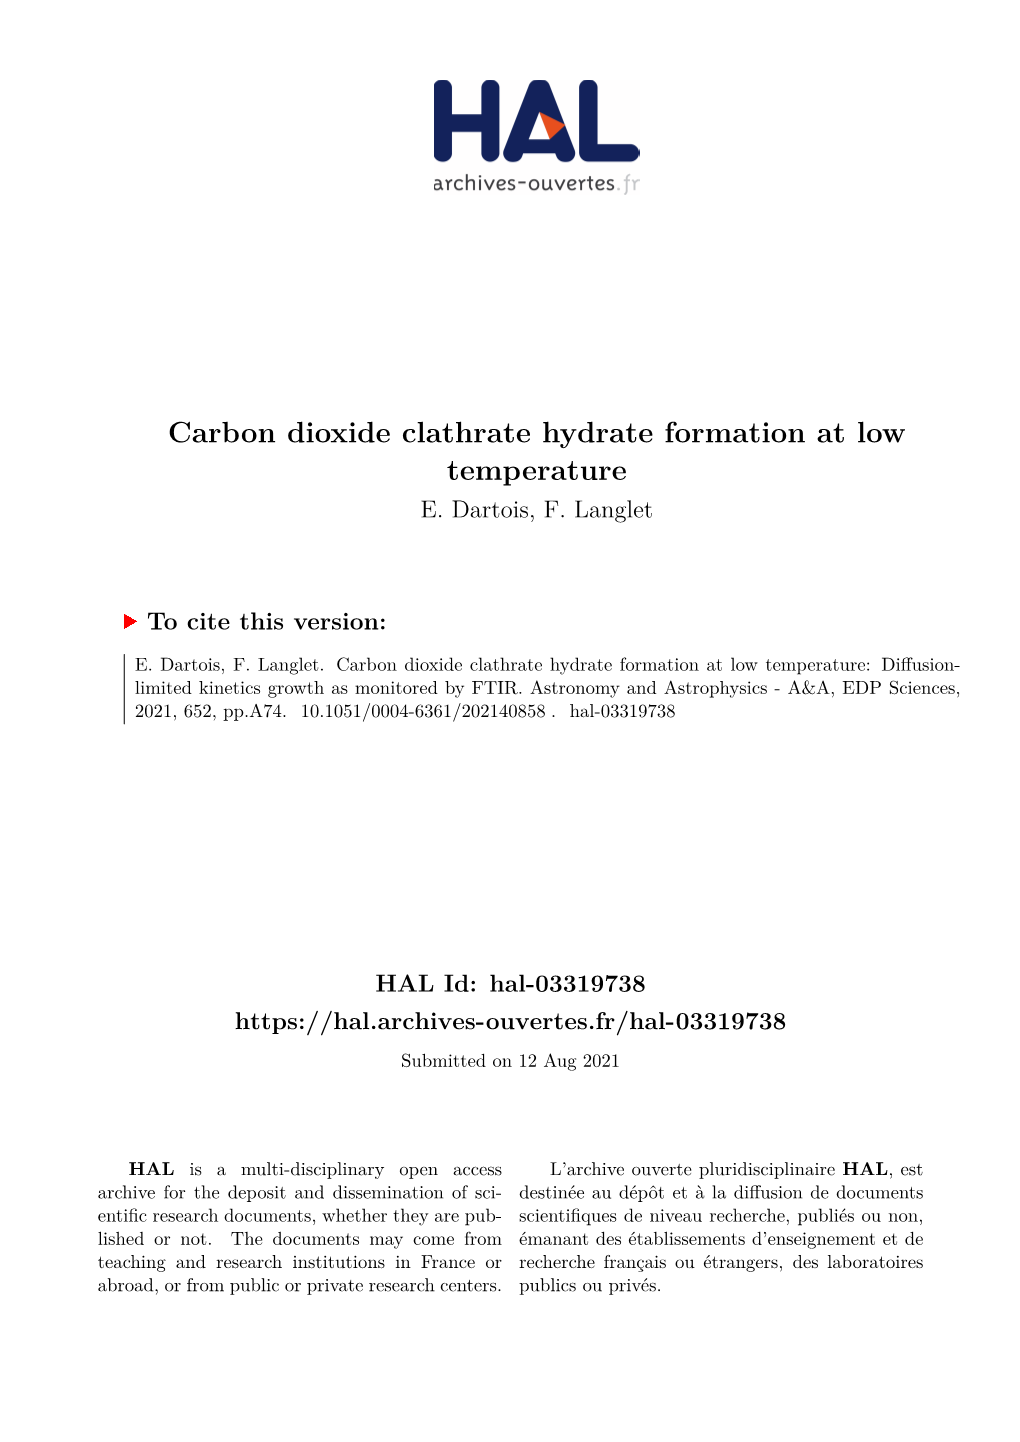 Carbon Dioxide Clathrate Hydrate Formation at Low Temperature E